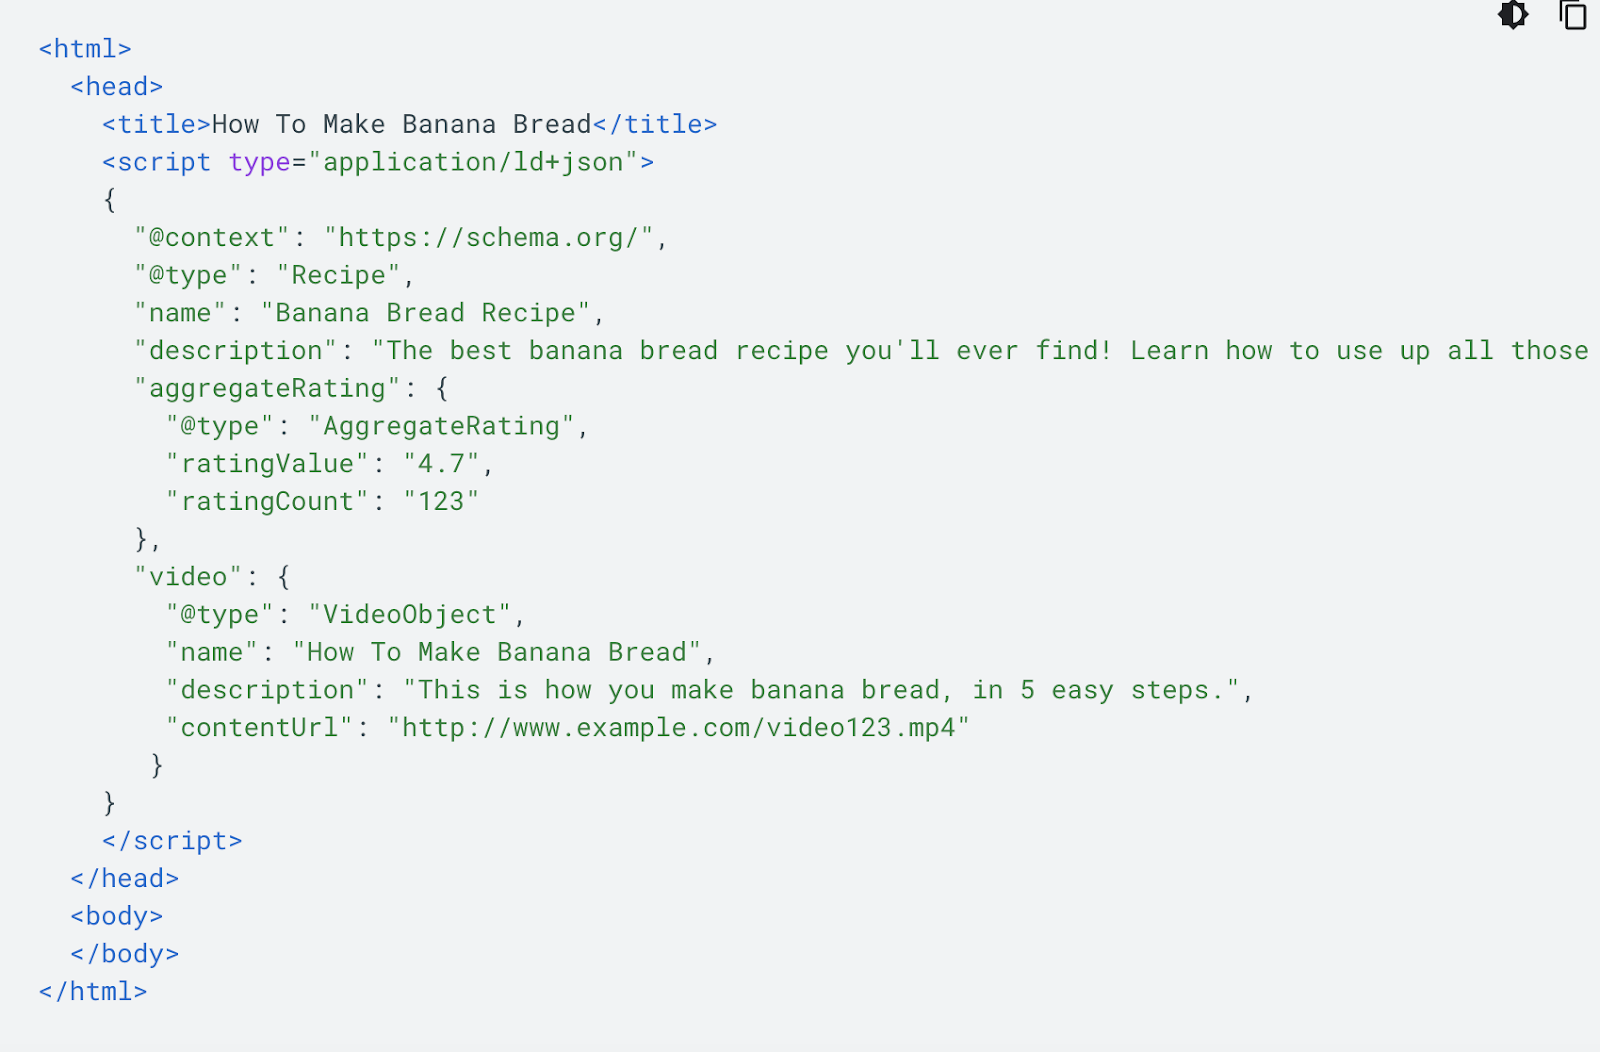 example of structured data code for a recipe schema